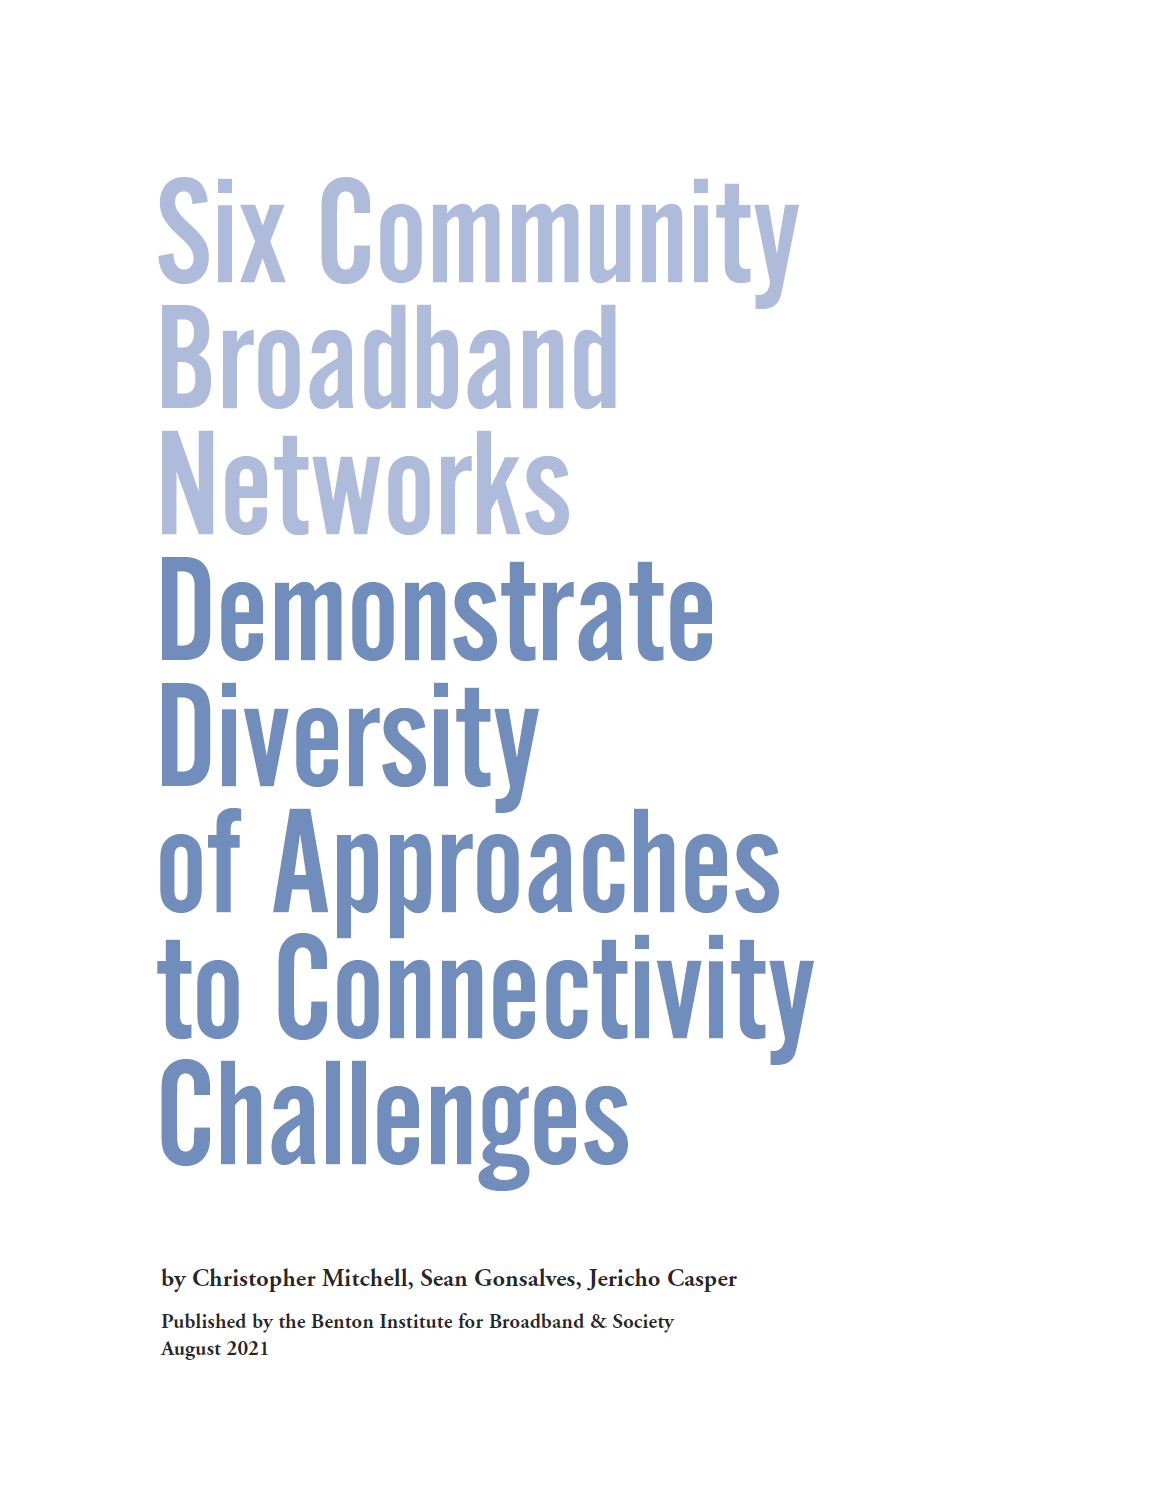 Six Community Broadband Networks Demonstrate Diversity of Approaches to Connectivity Challenges